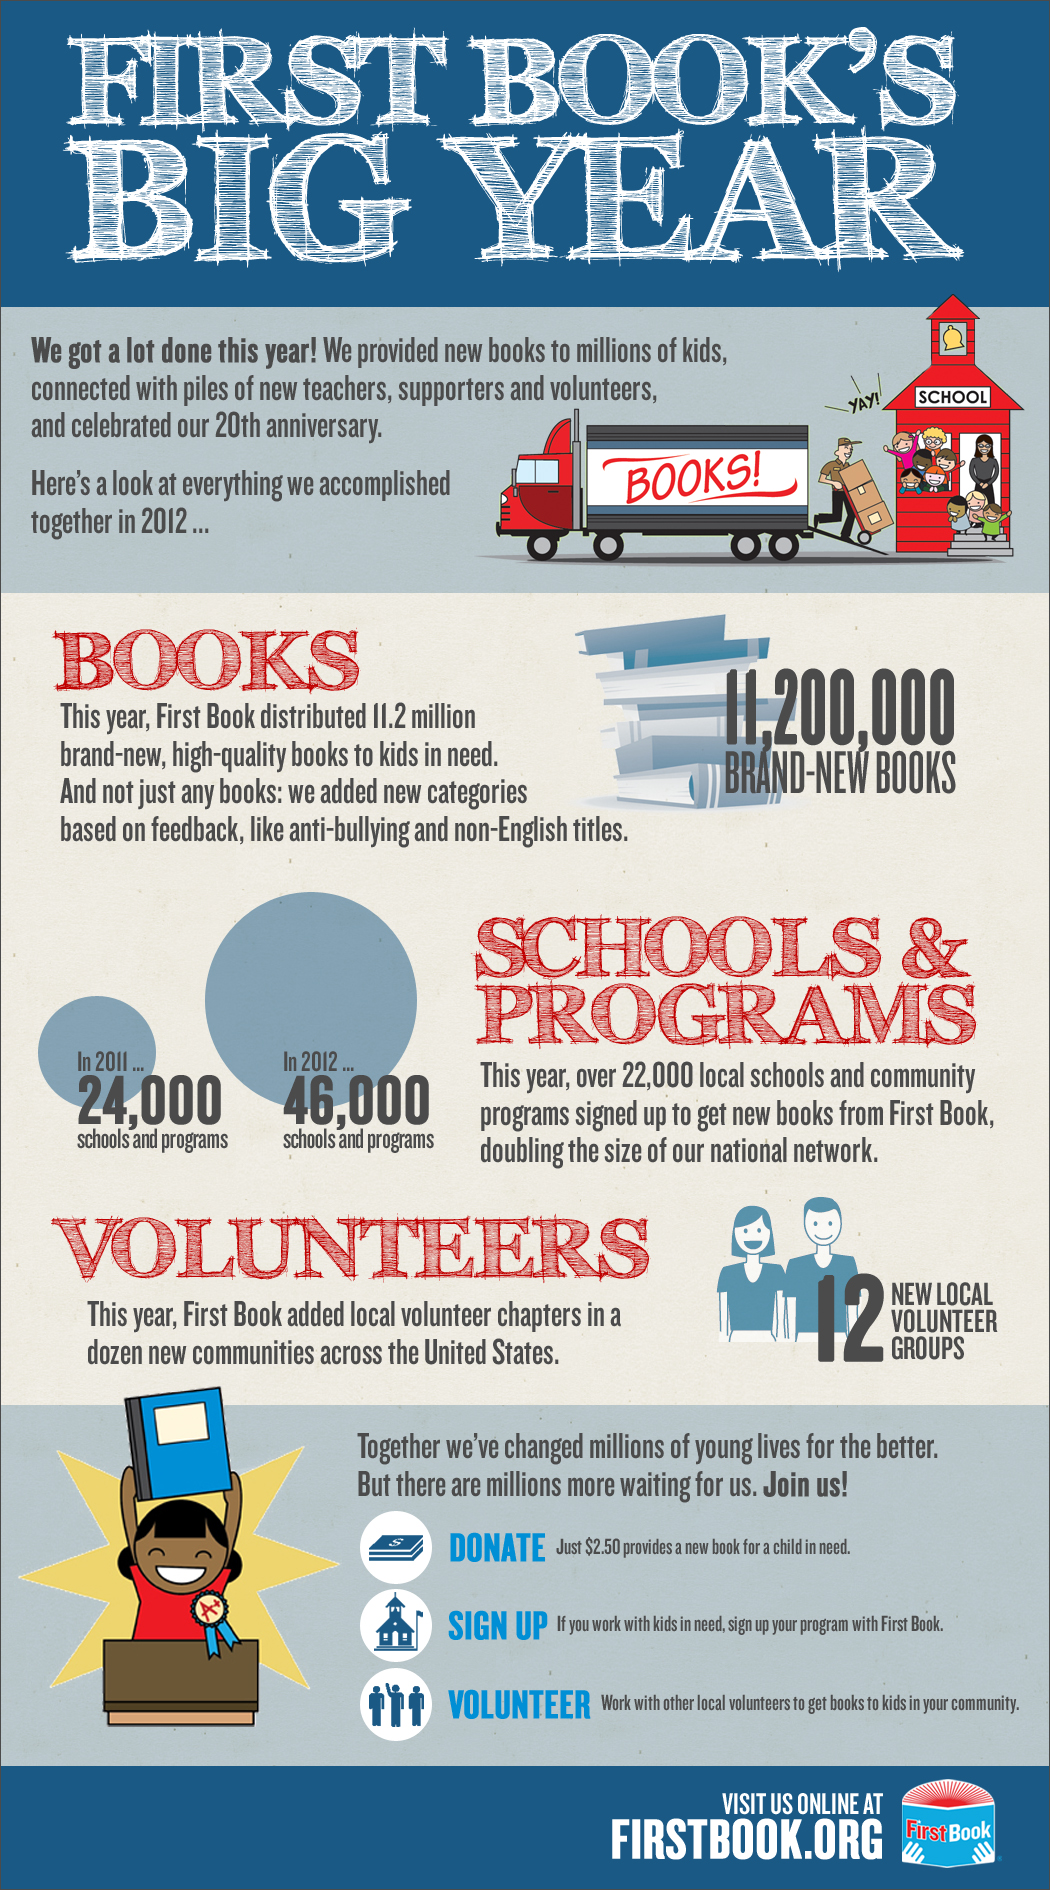 First Book's Big Year: We got a lot of books to kids in 2012